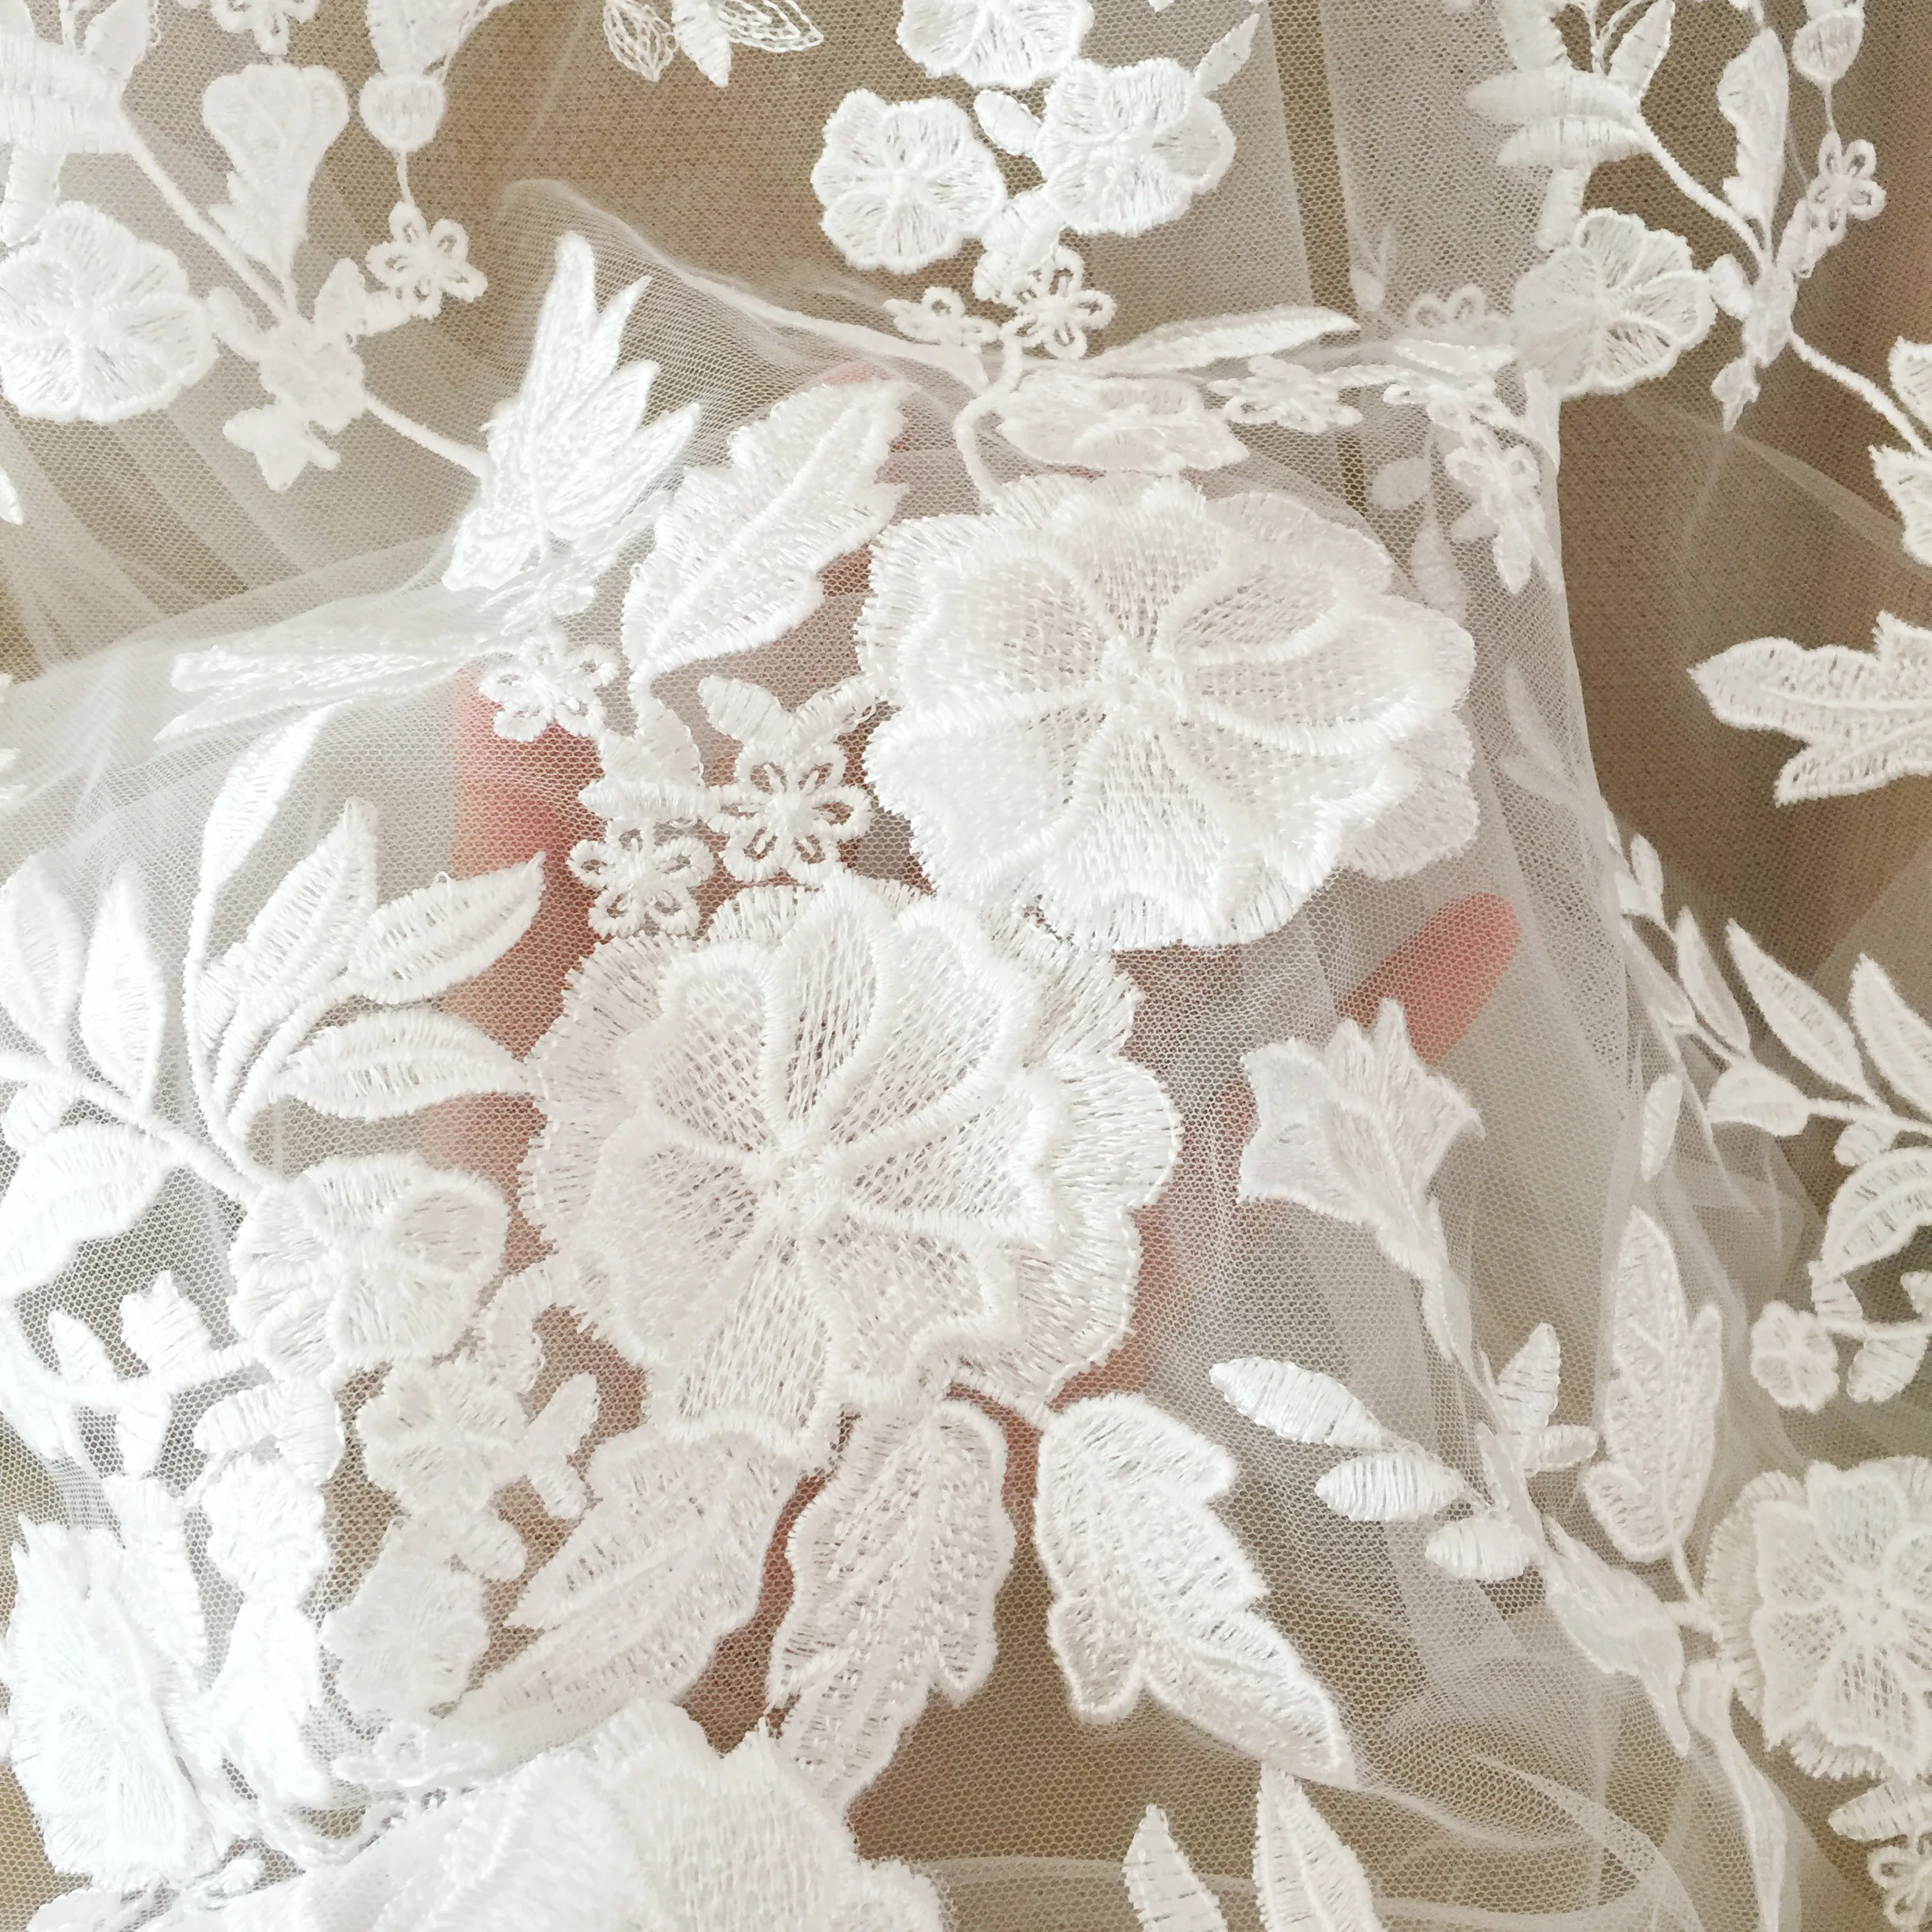 White Bridal Lace Fabric, Lace Fabric, Bridal Lace, Embroidery